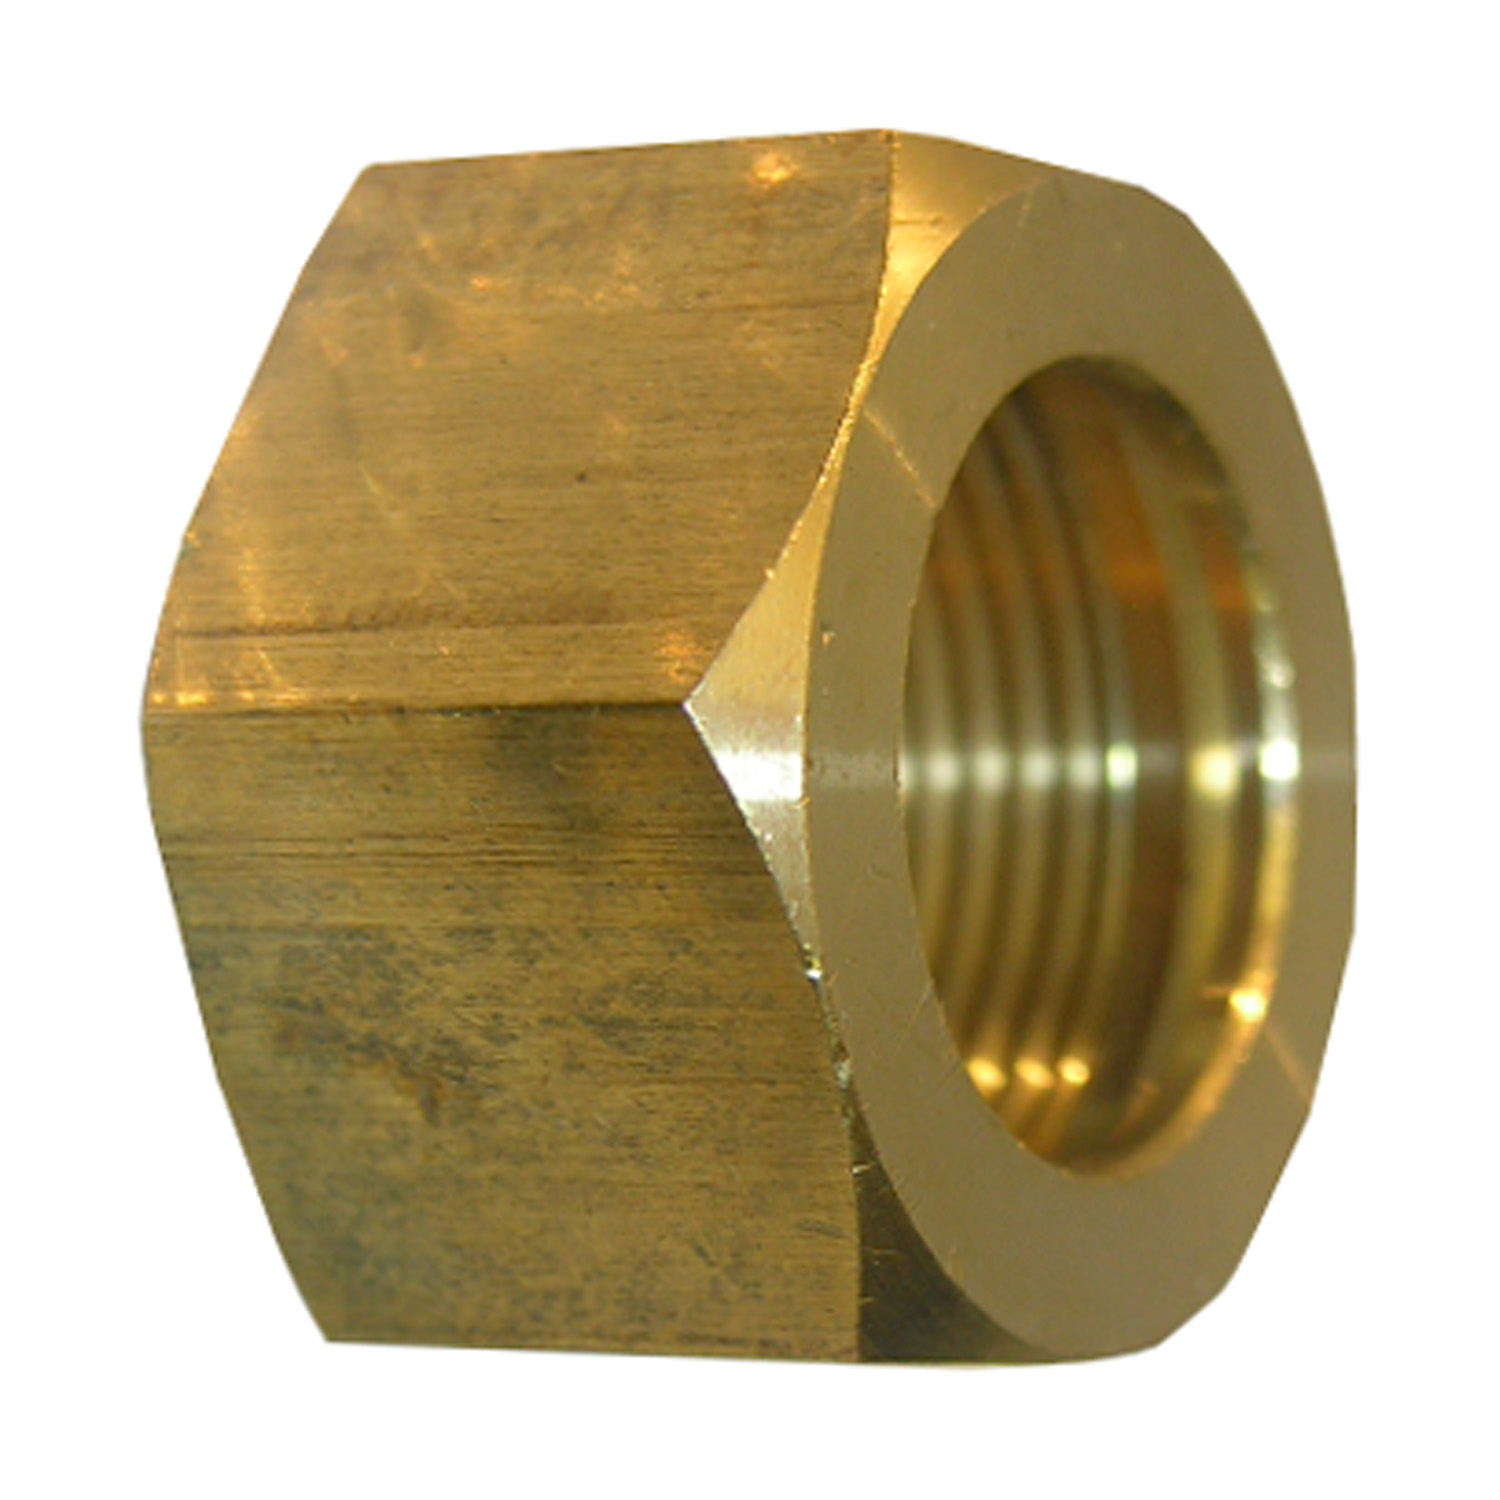 Lasco 17-6125 Nut and Sleeve, 5/16 in, Compression, Brass